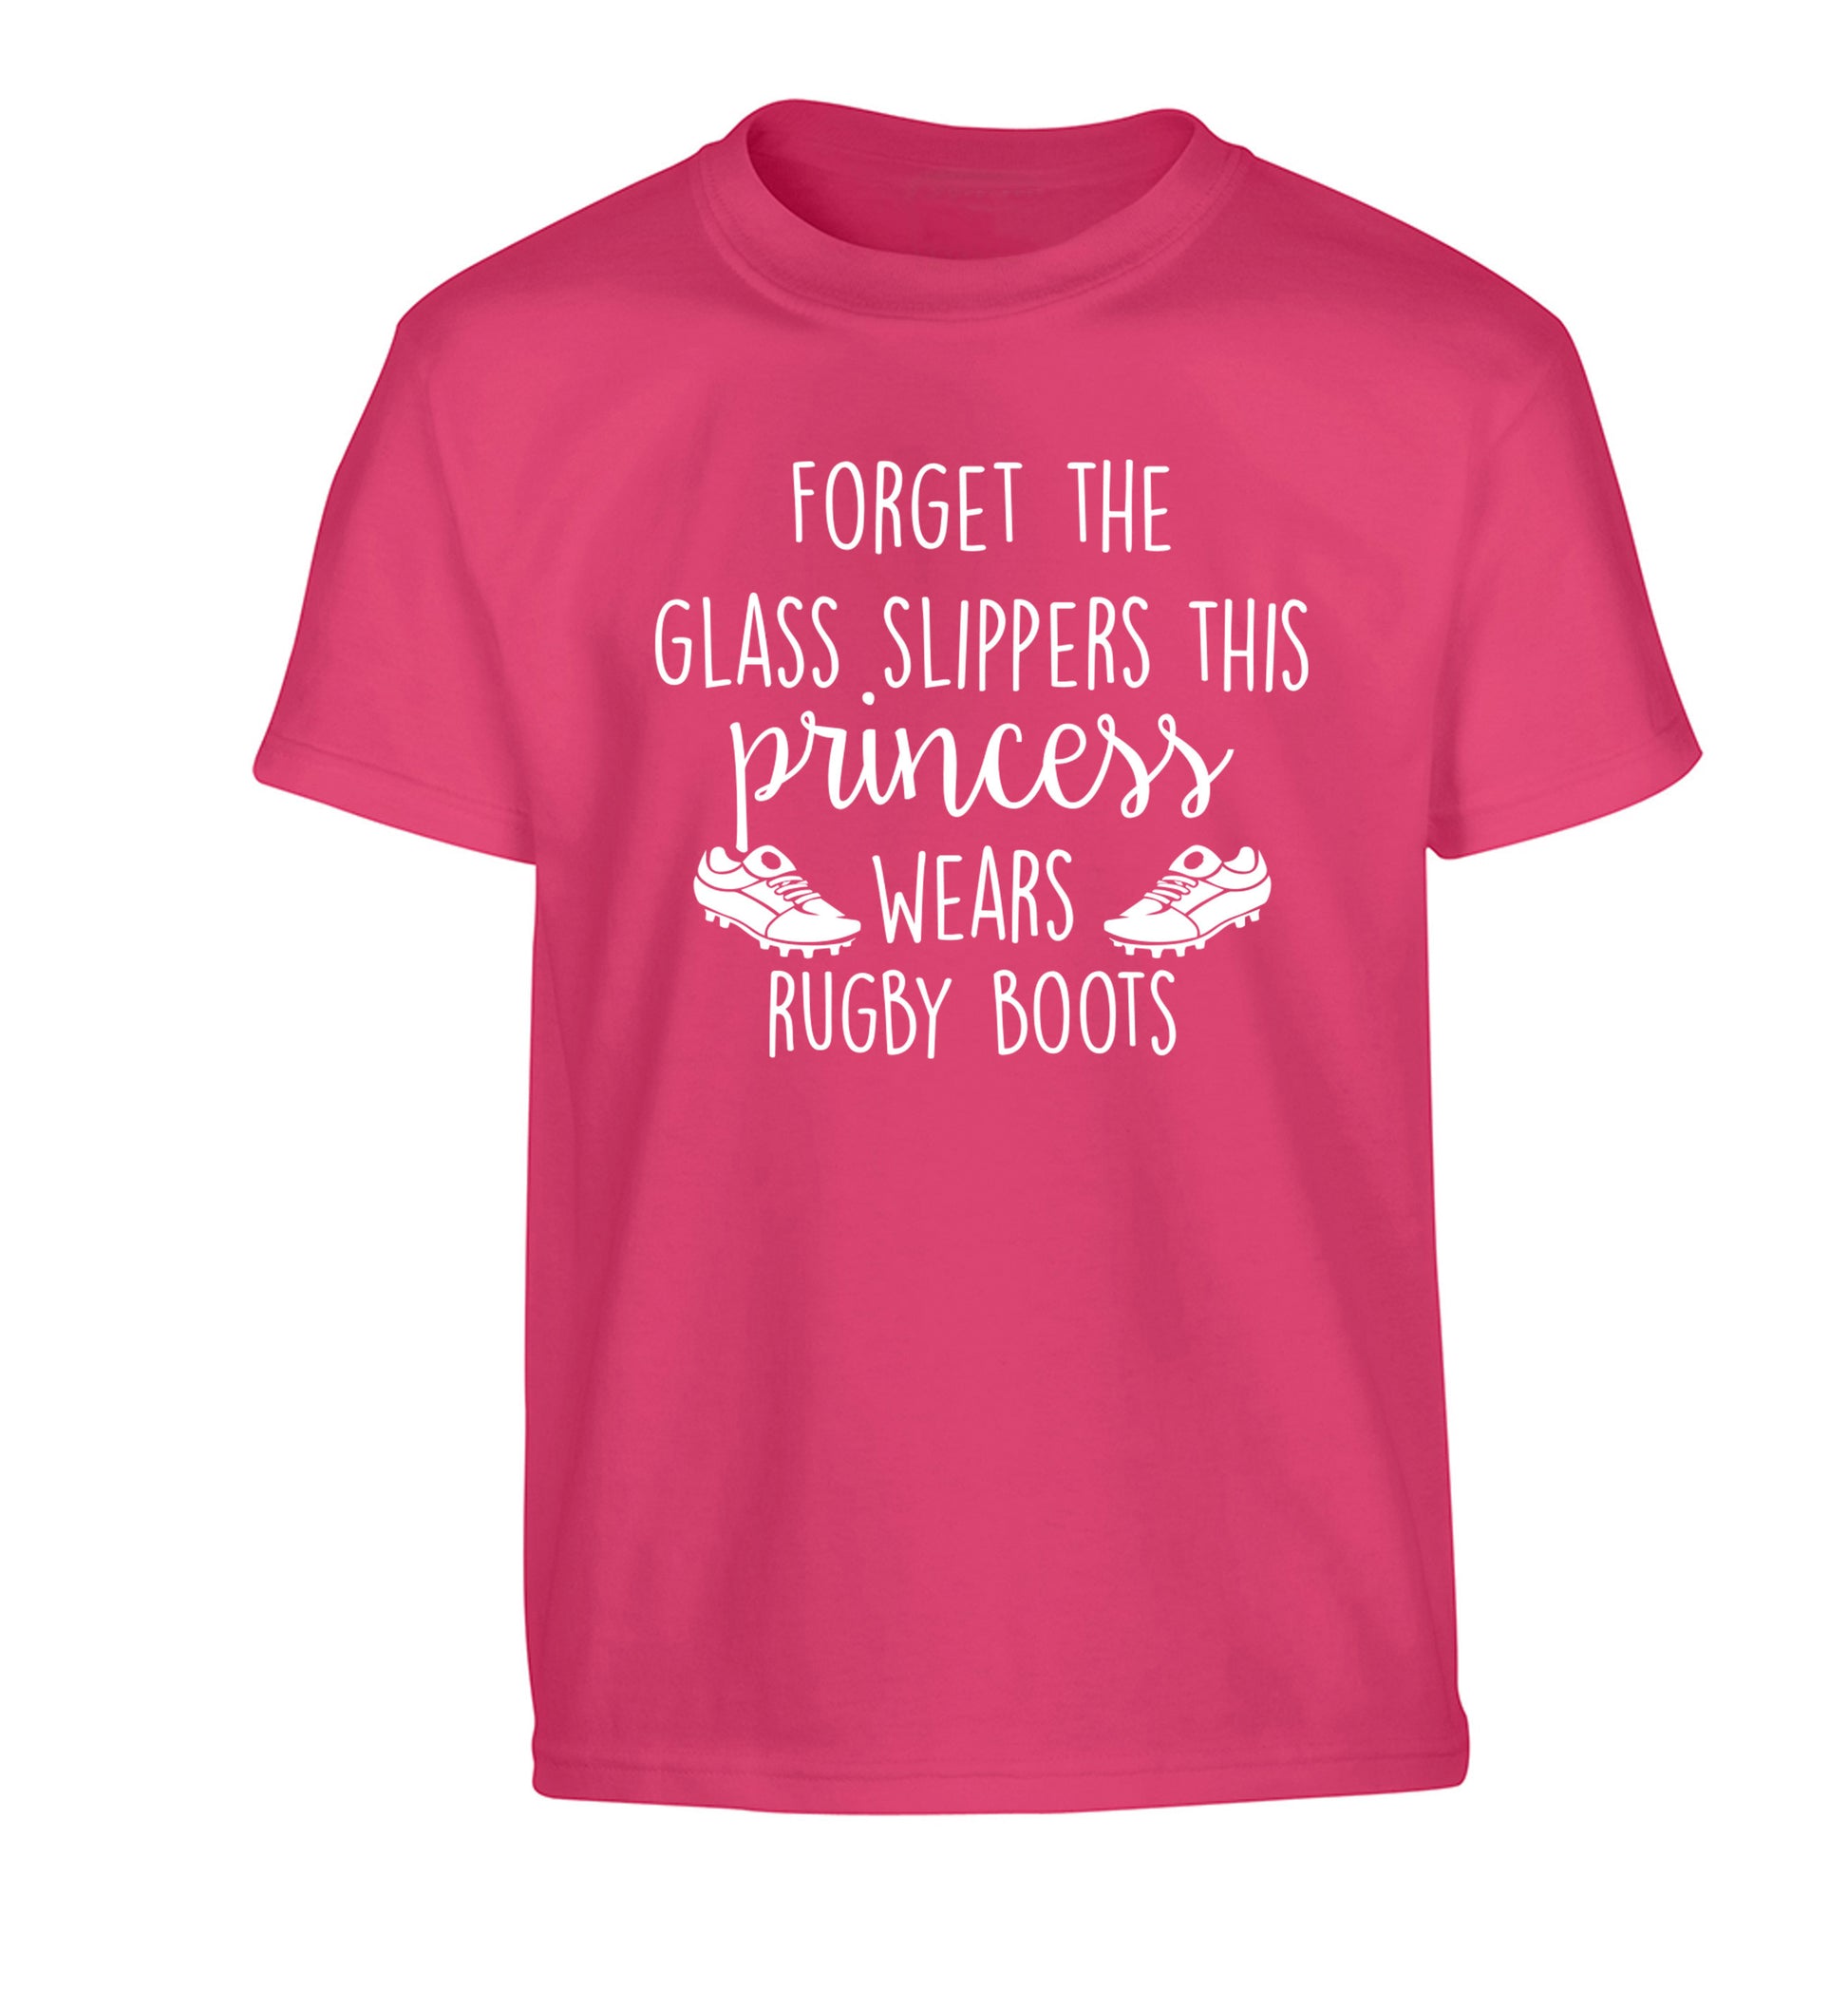 Forget the glass slippers this princess wears rugby boots Children's pink Tshirt 12-14 Years